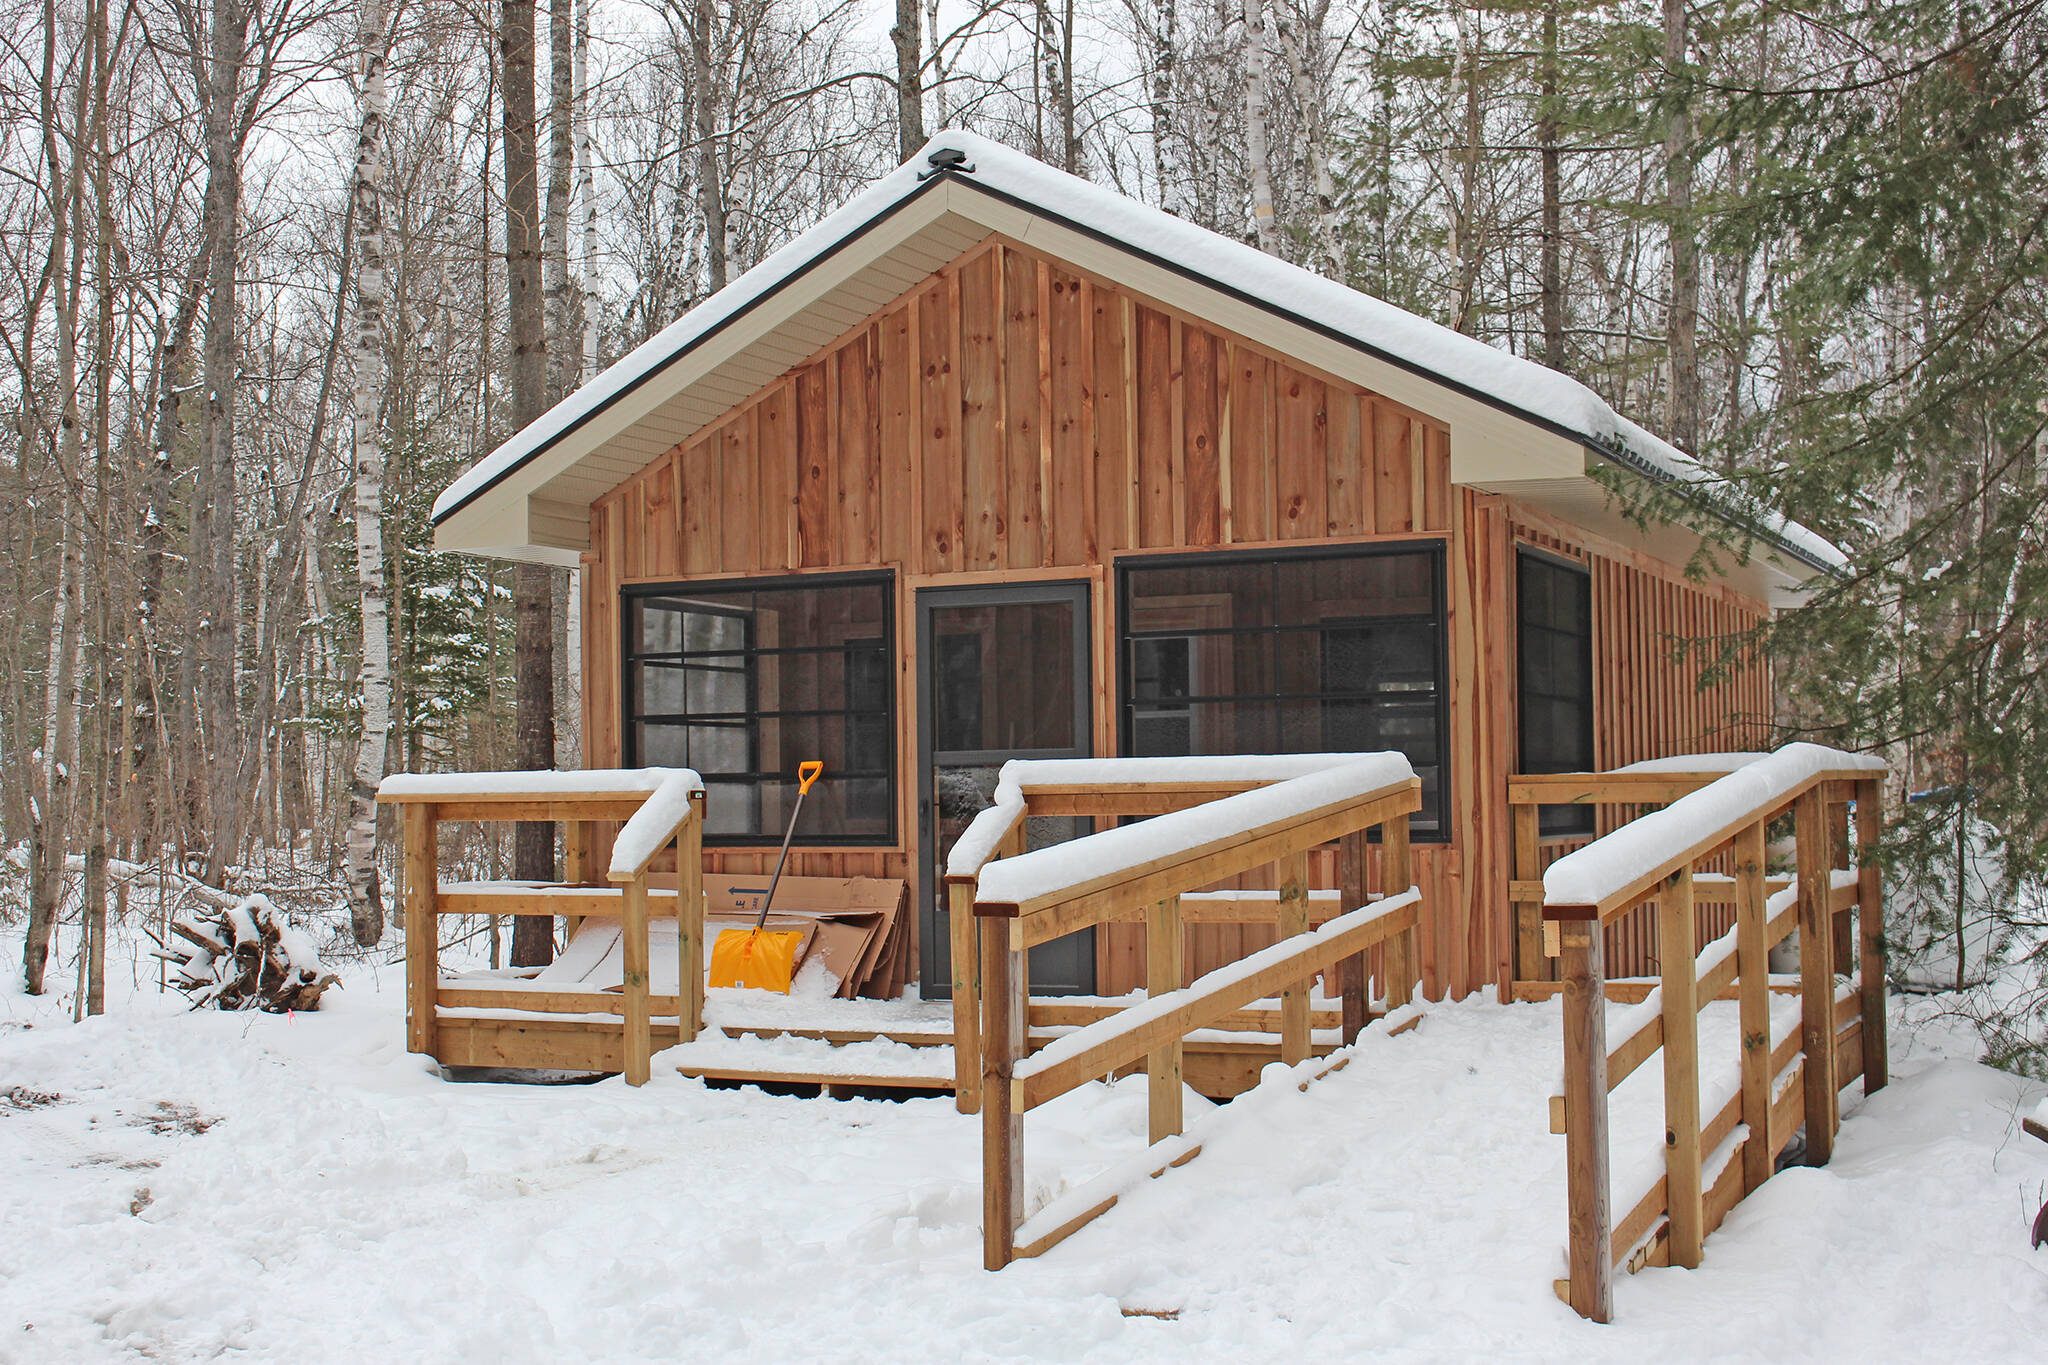 5 Campsites With Heated Cabins And Yurts Near Toronto